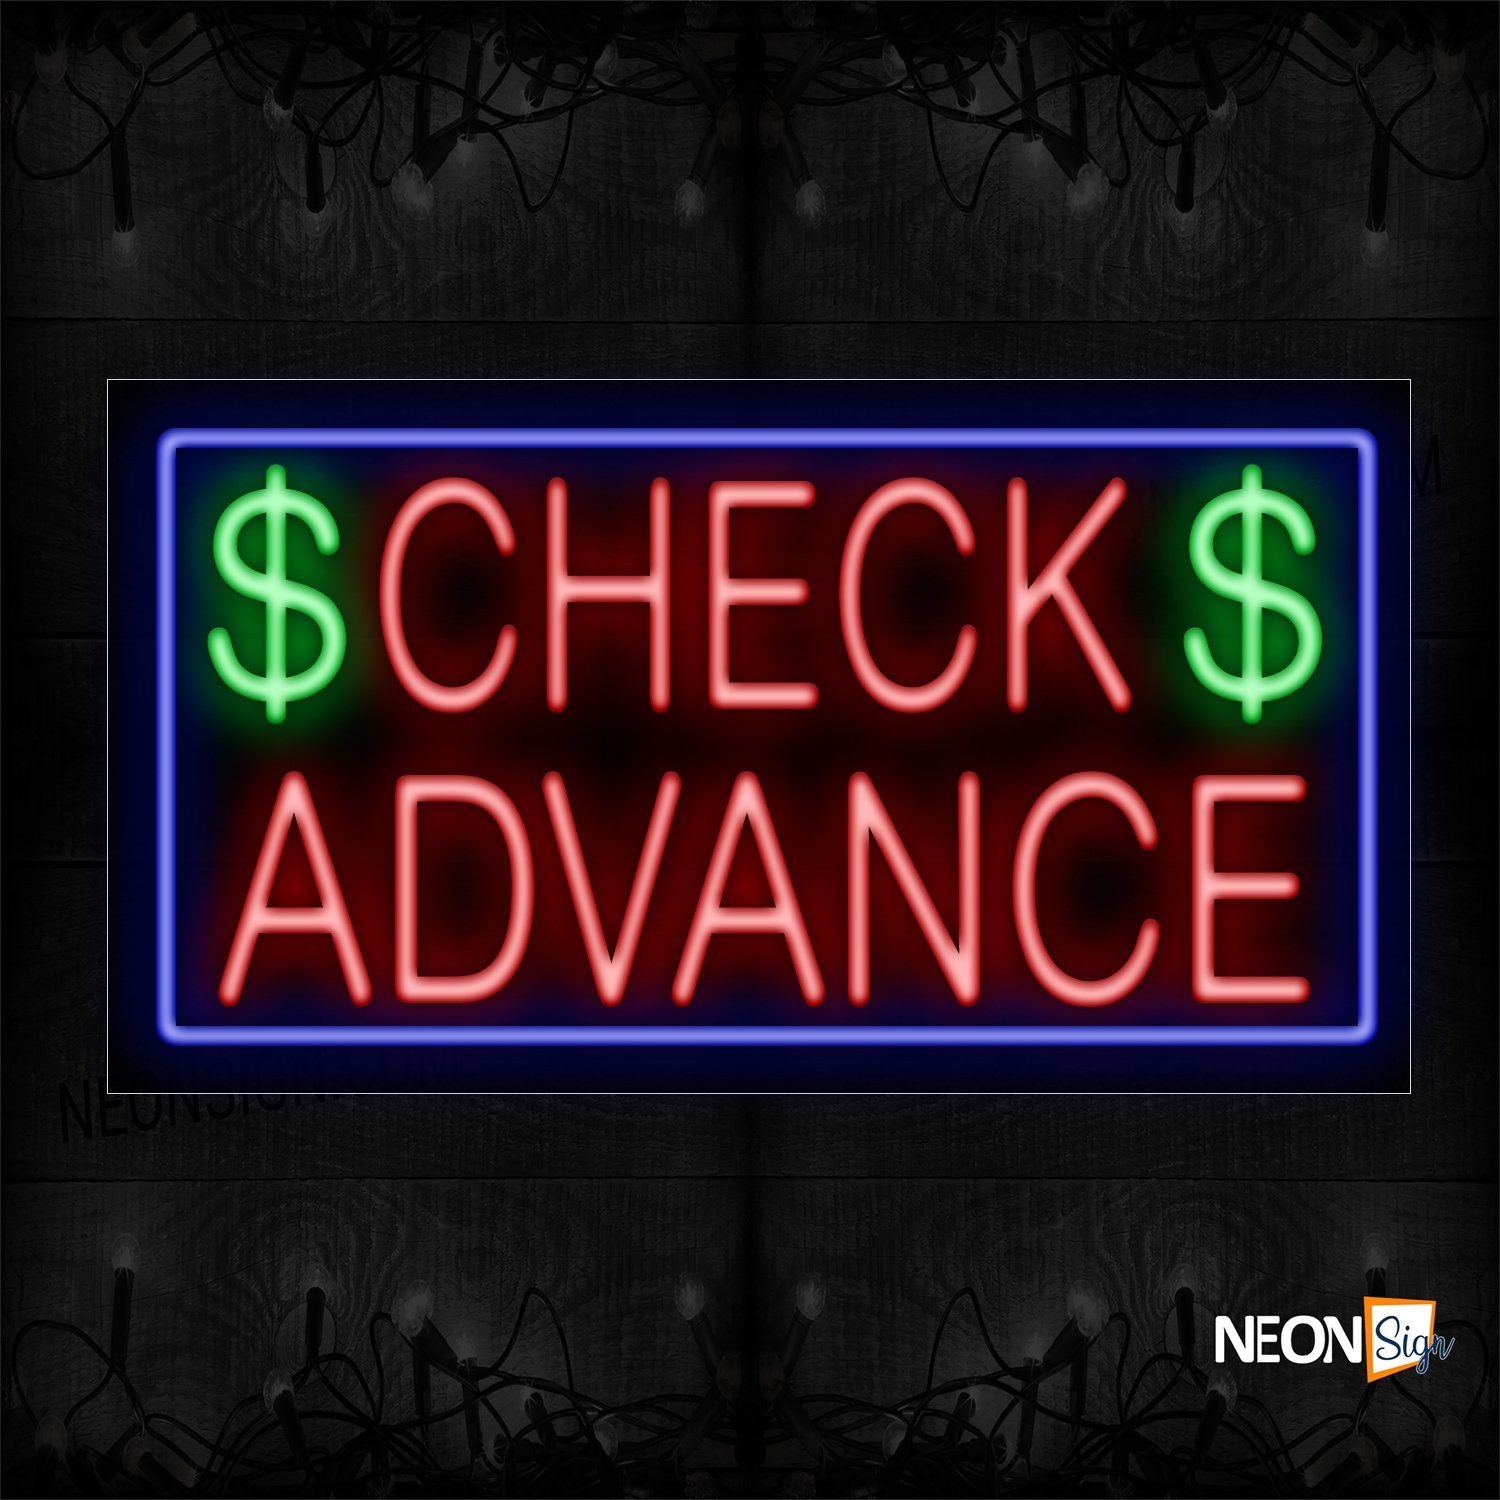 Image of 11674 $ Check $ Advance In Red With Blue Border Neon Sign_20x37 Black Backing